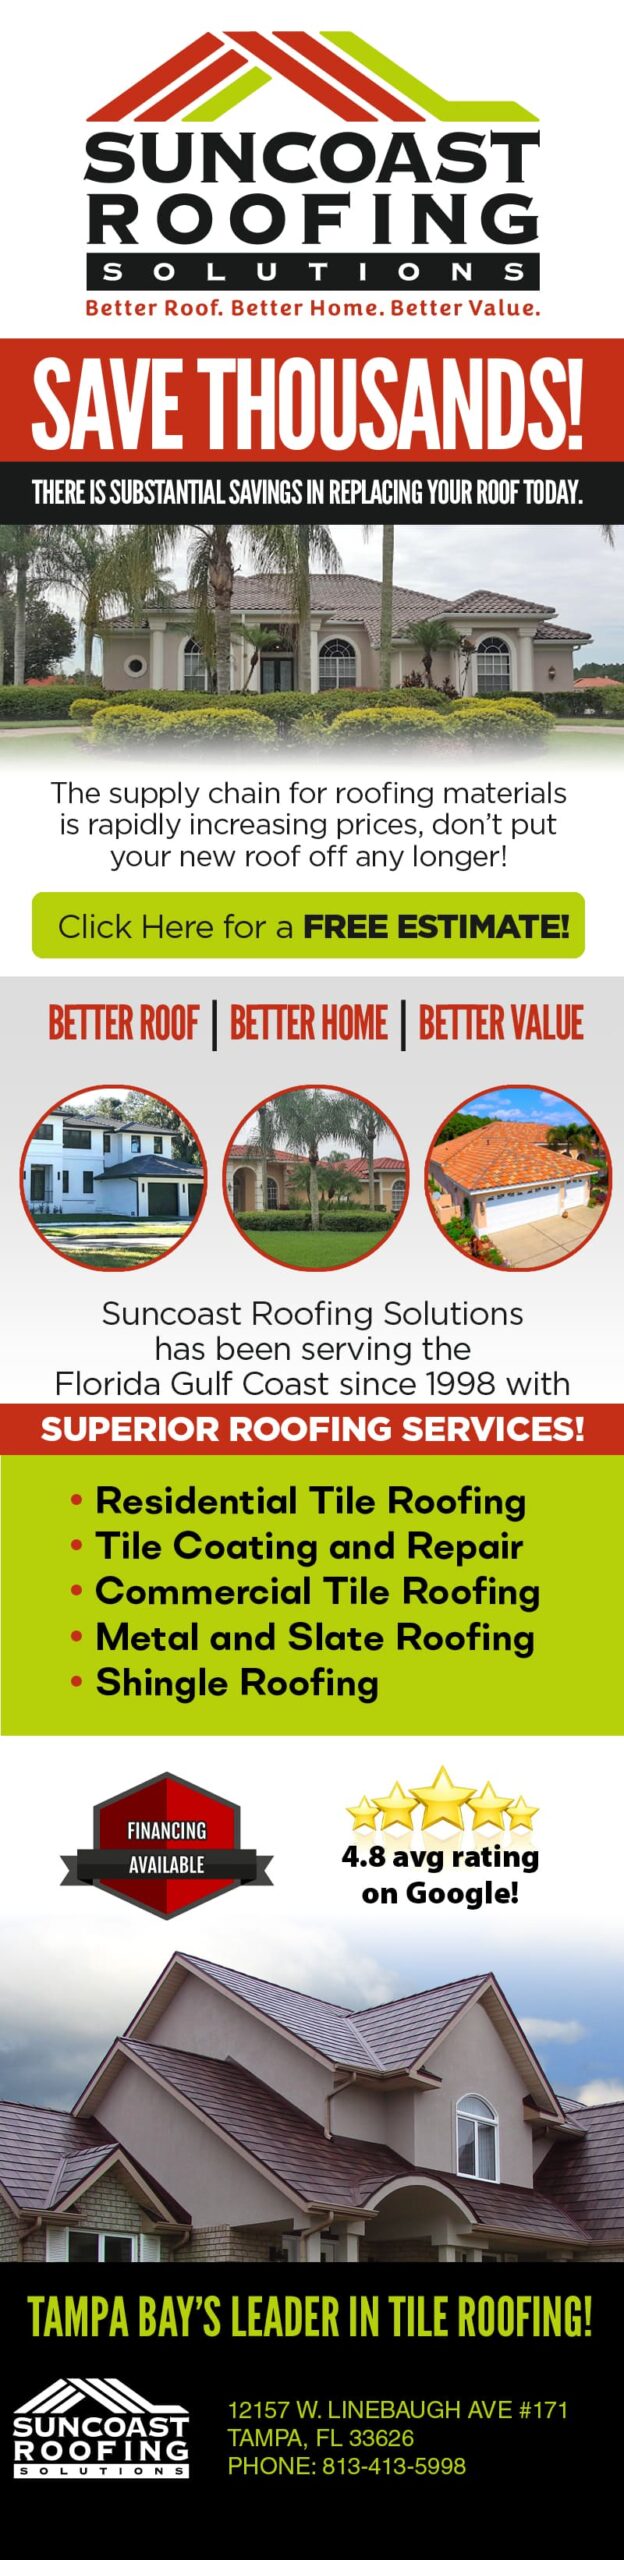 Suncoast Roofing Solutions Email